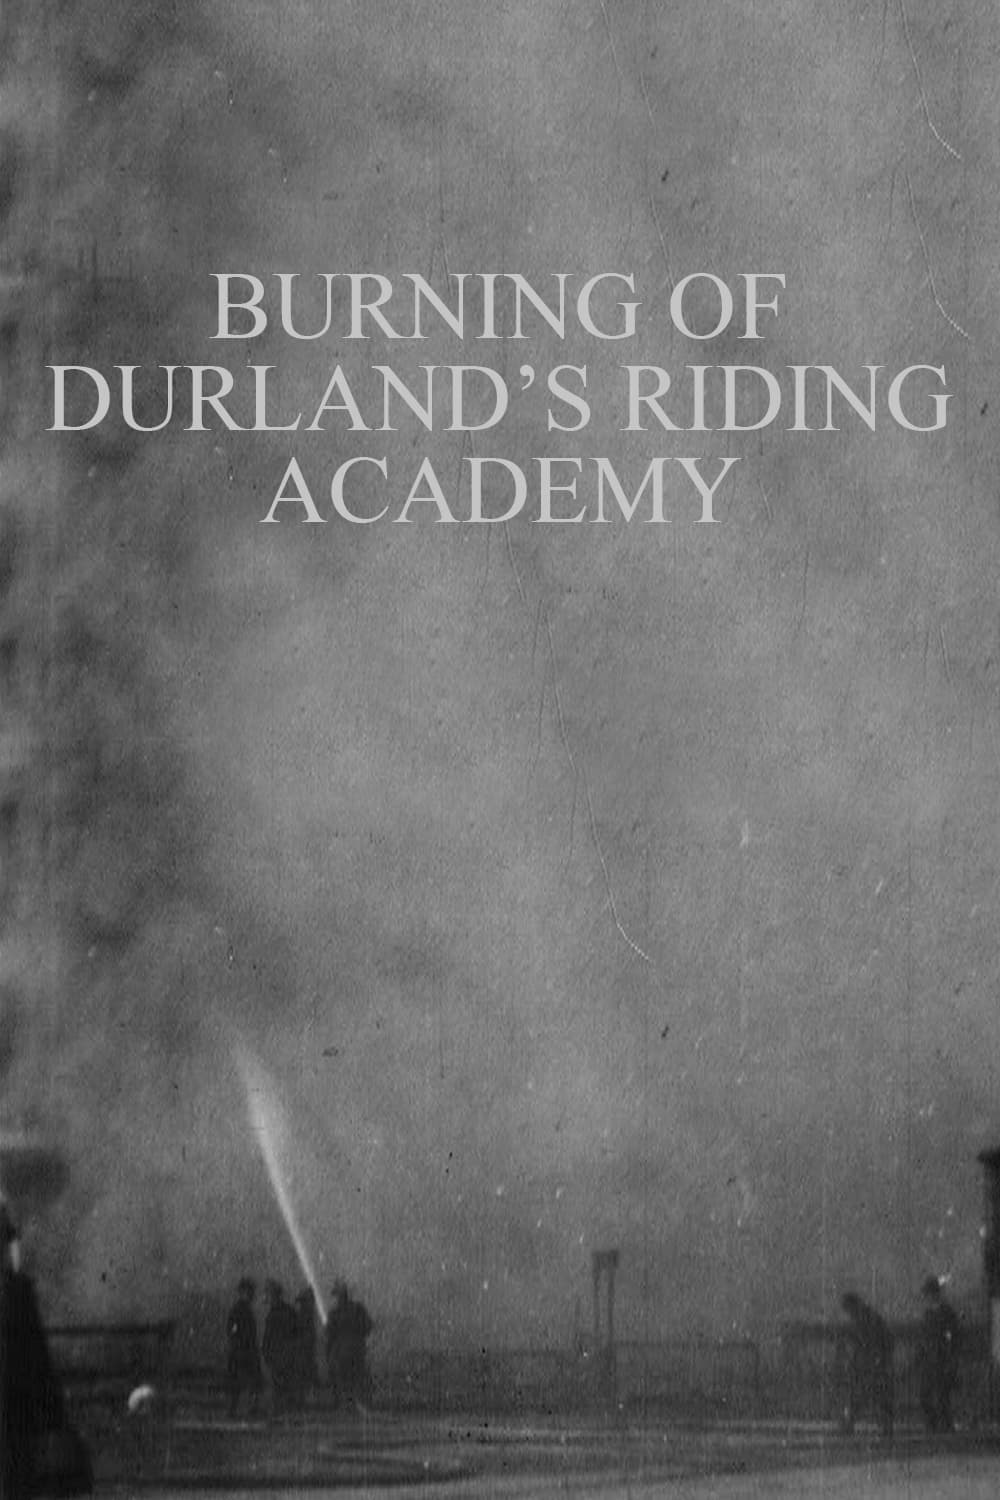 Burning of Durland's Riding Academy